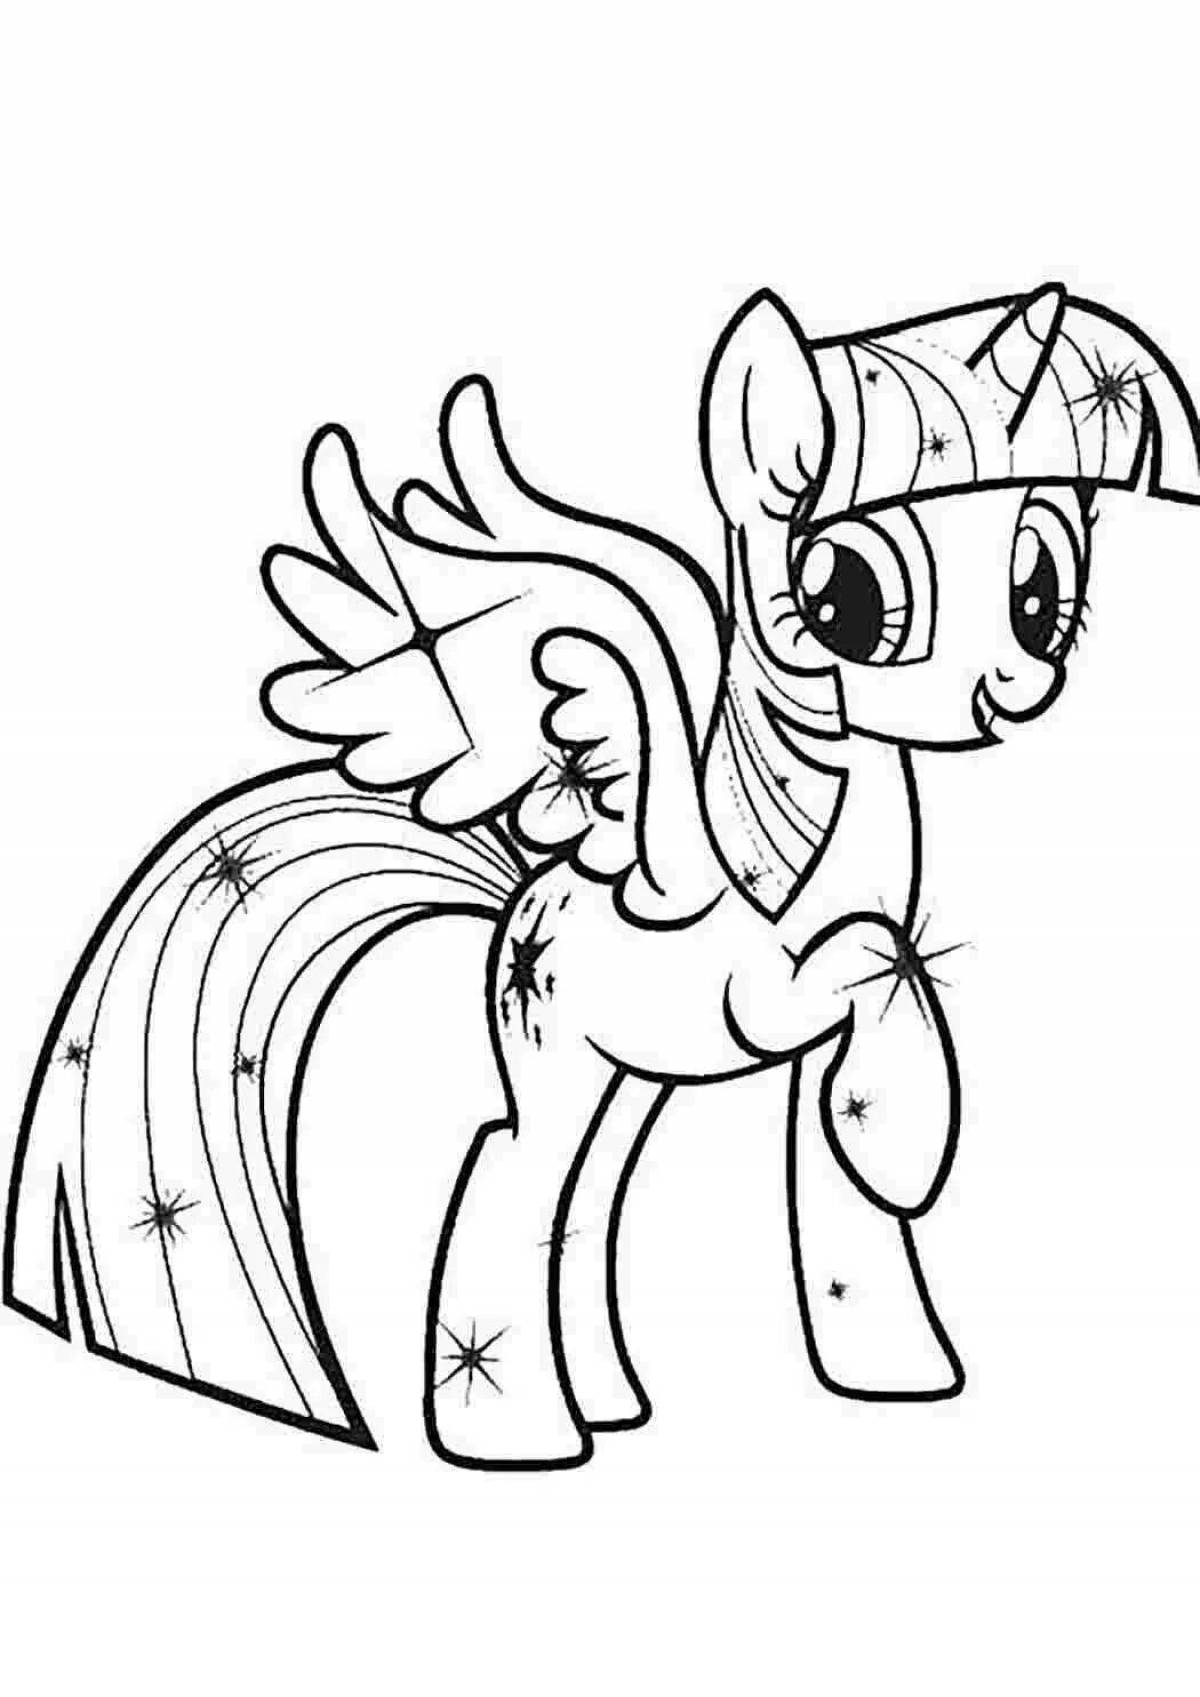 Colorful sparkle little pony coloring page